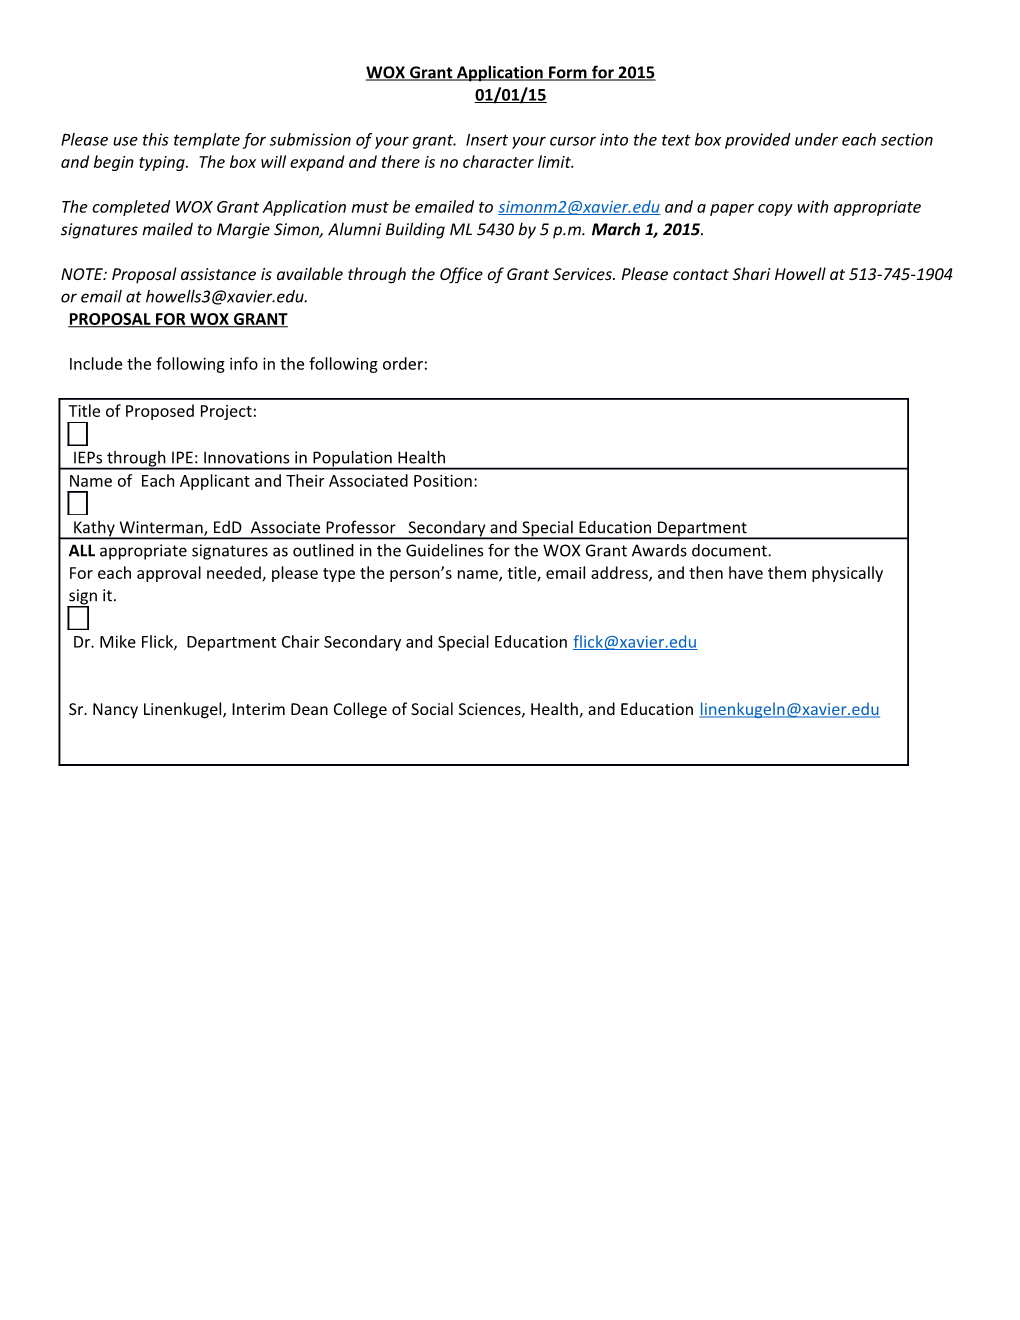 WOX Grant Application Form for 2015